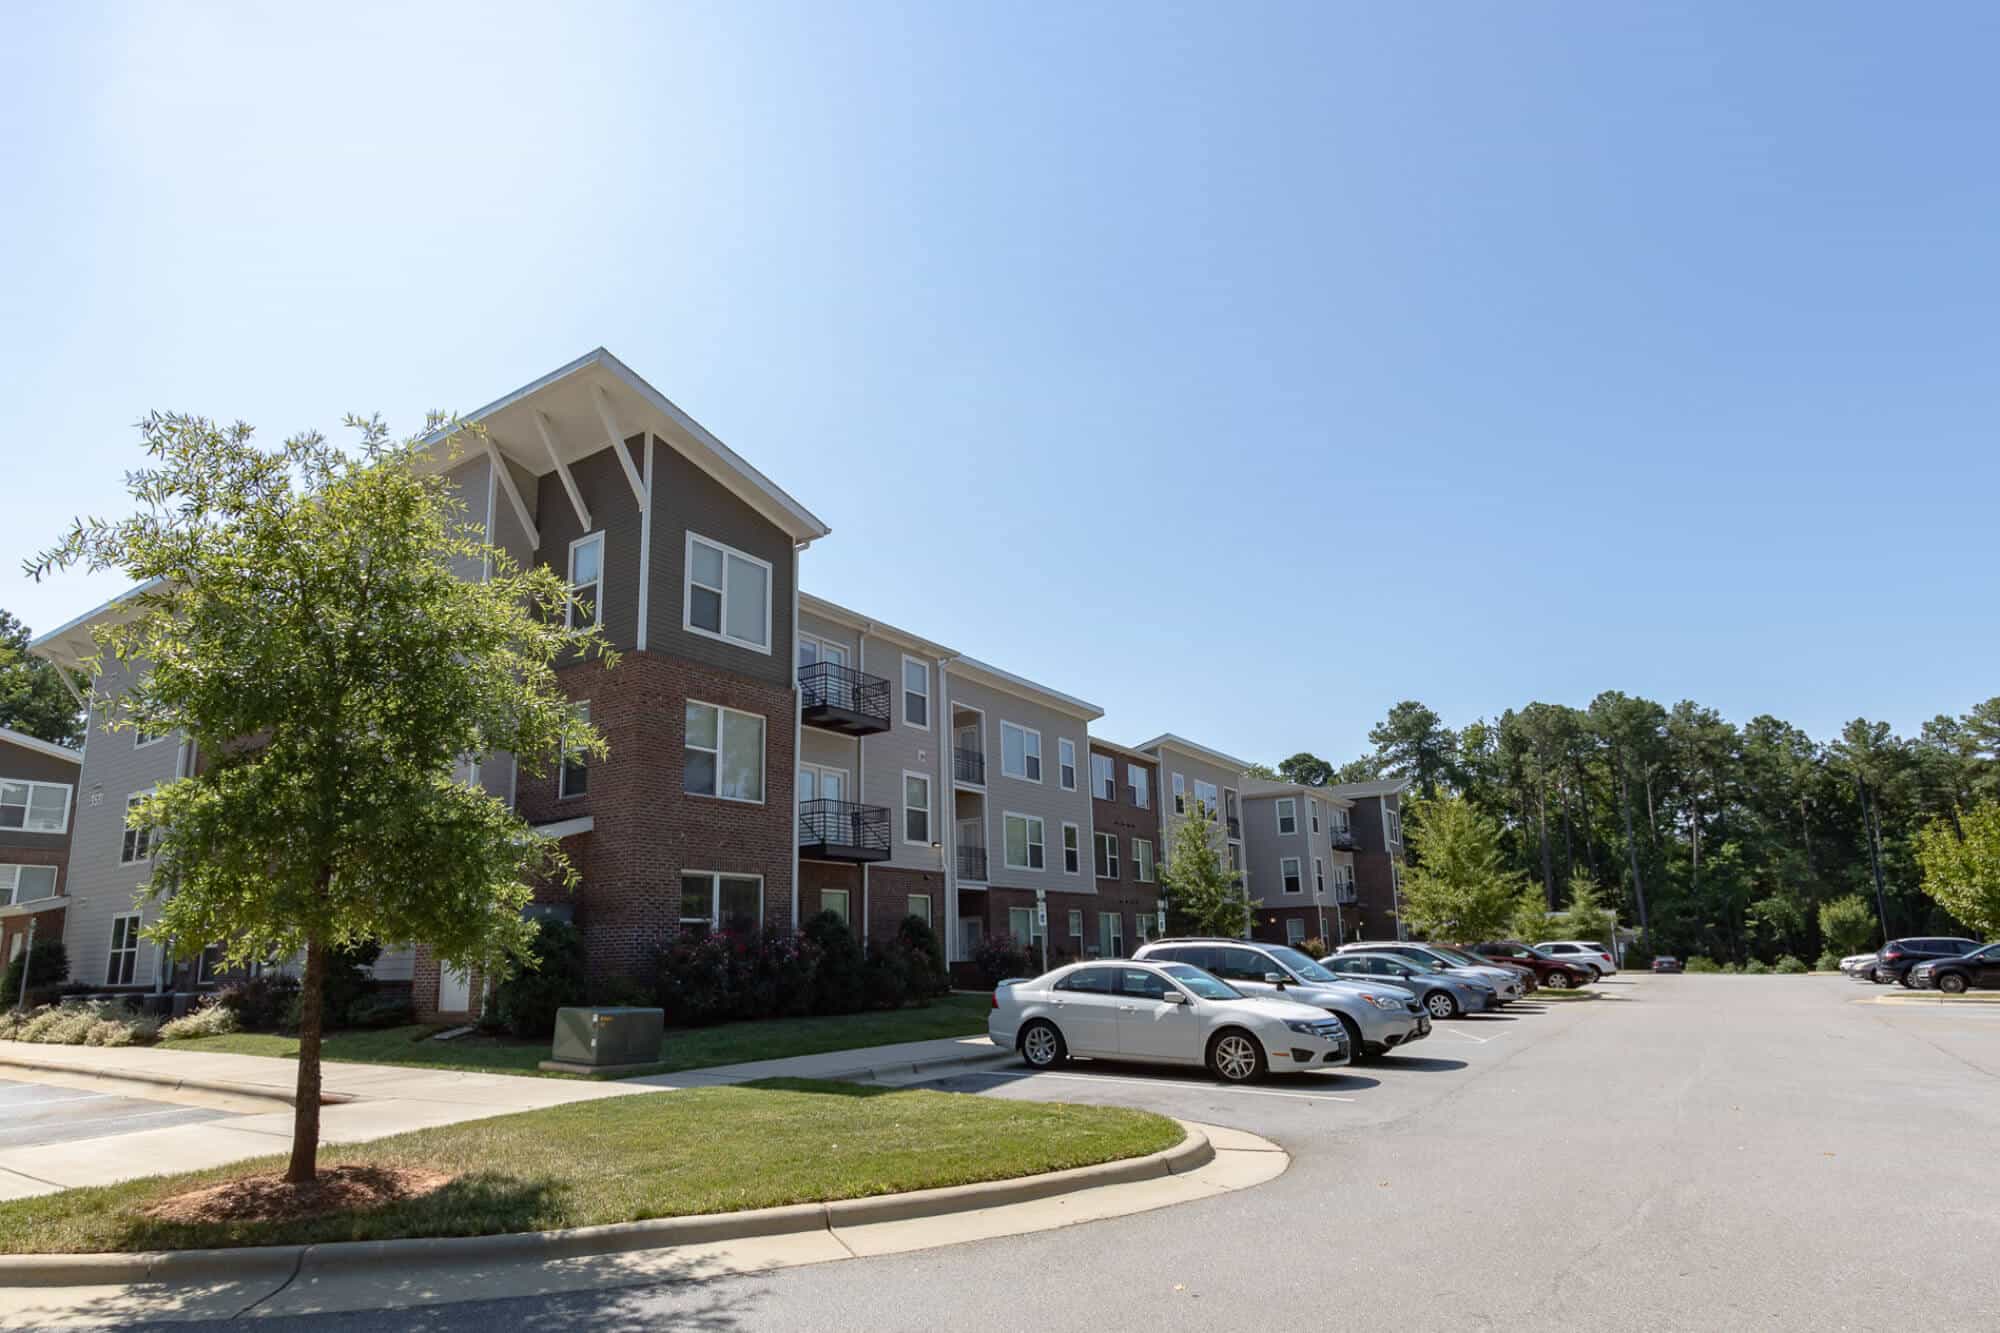 1820 at centennial off campus apartments near nc state university raleigh north carolina community building exterior resident parking